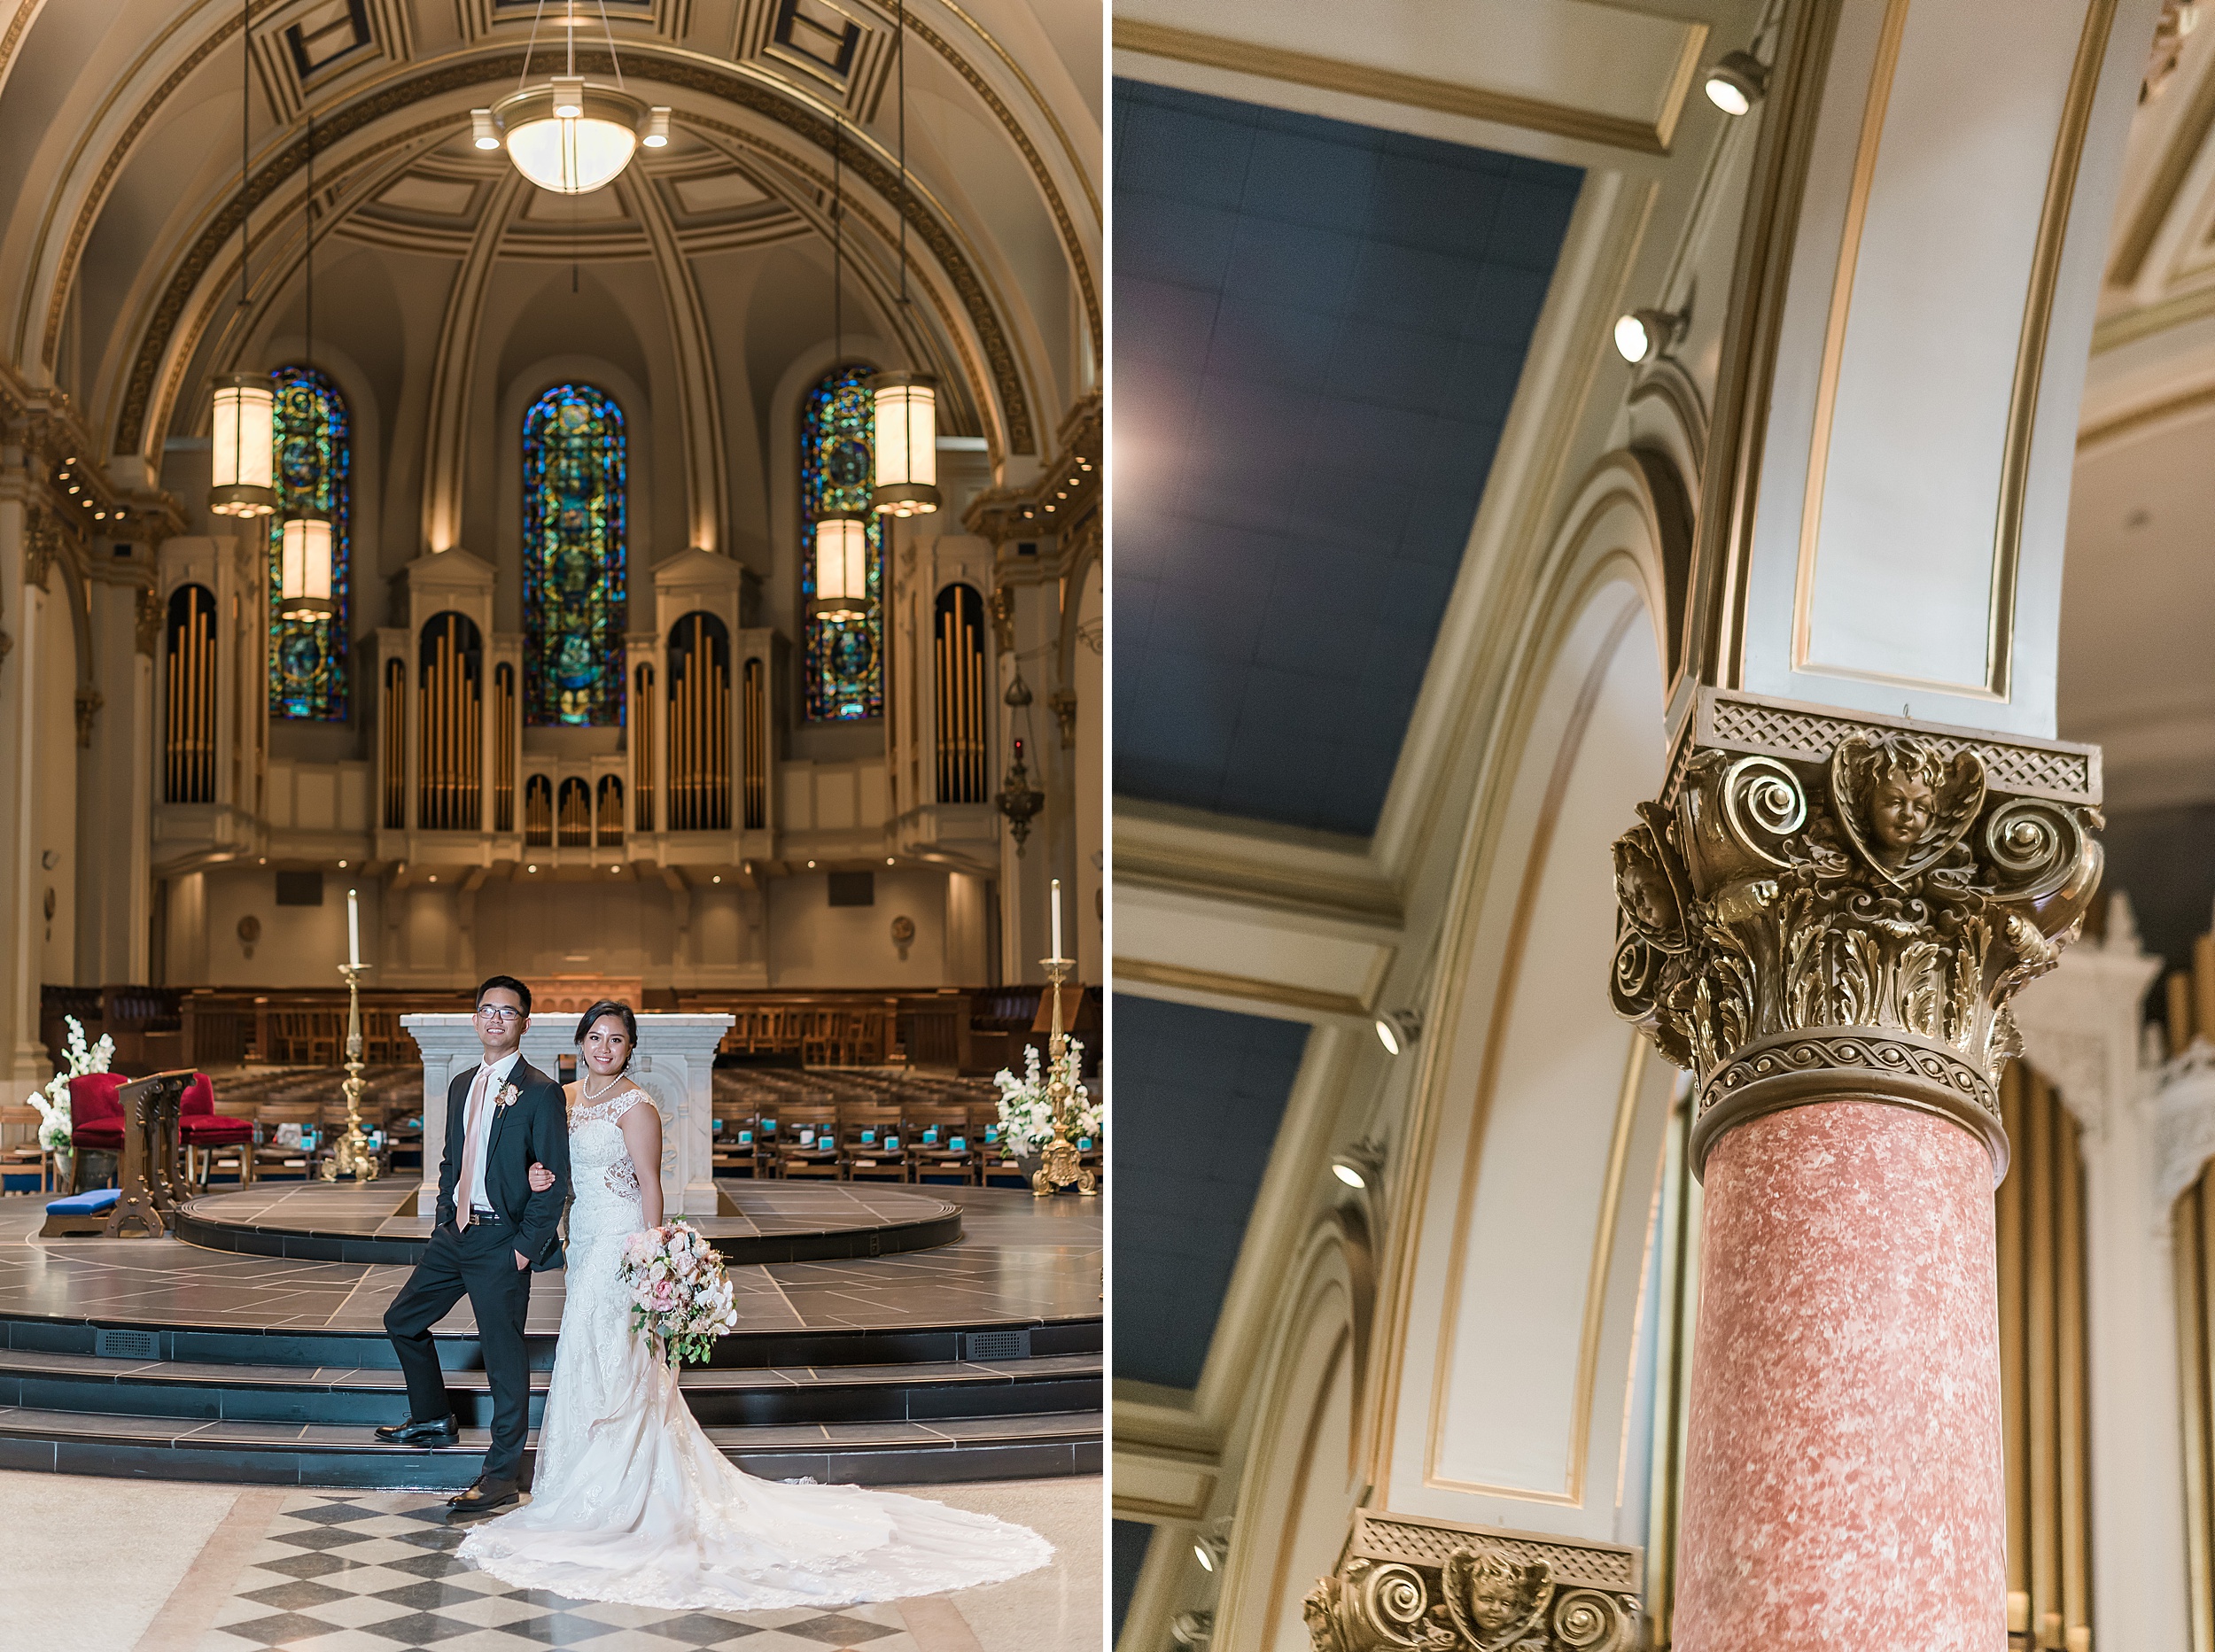  wedding photos at st james cathedral seattle 